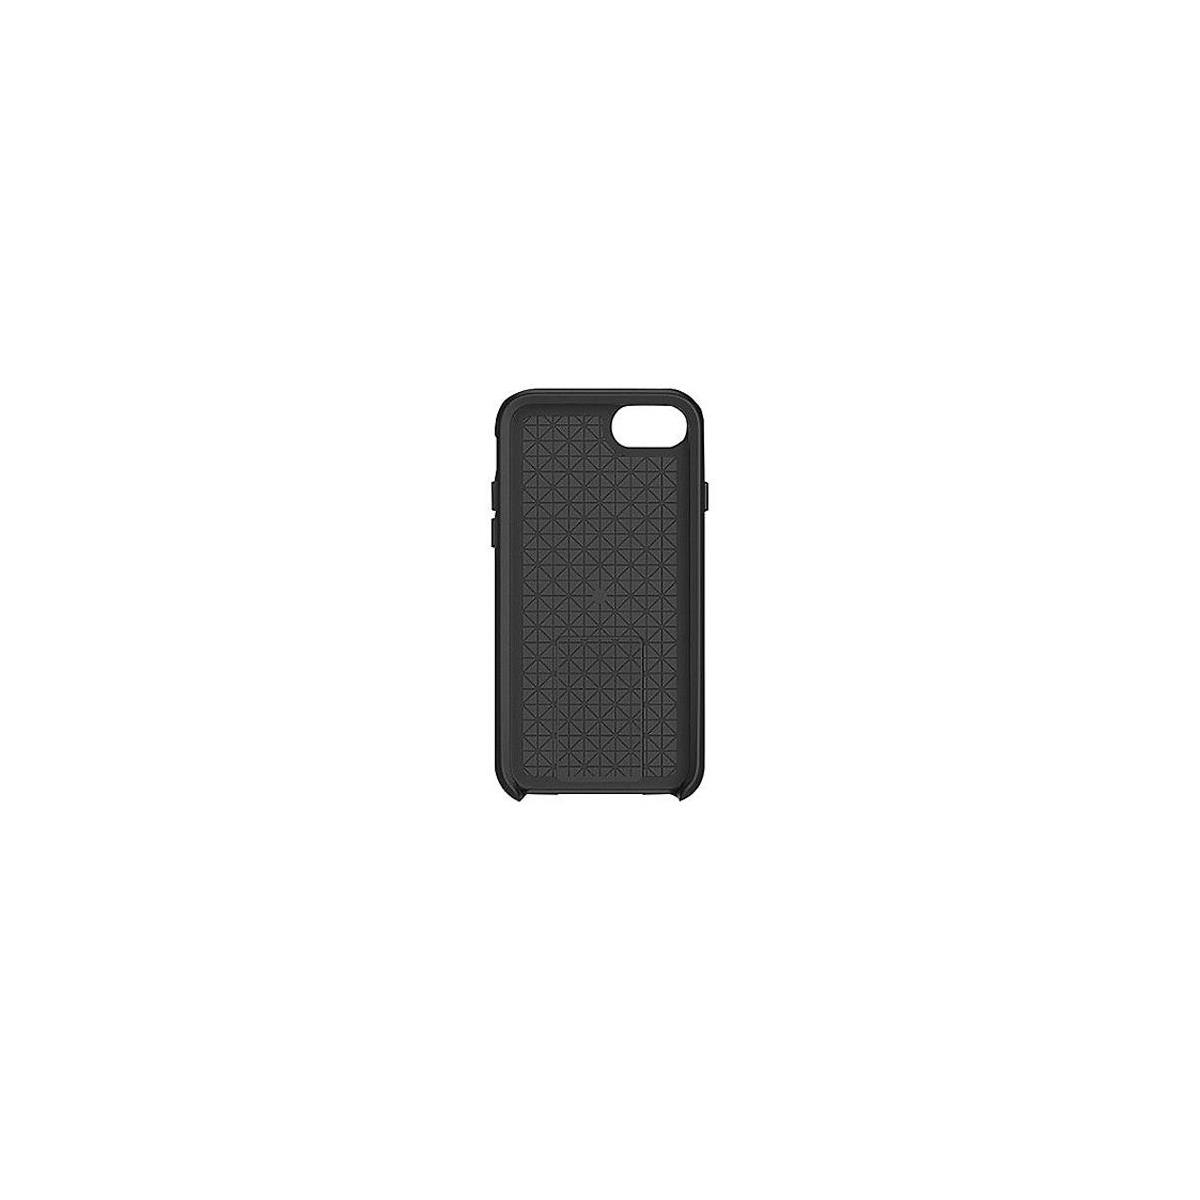 Photos - Case OtterBox uniVERSE  Pro Pack for iPhone 7, Black 77-54090 